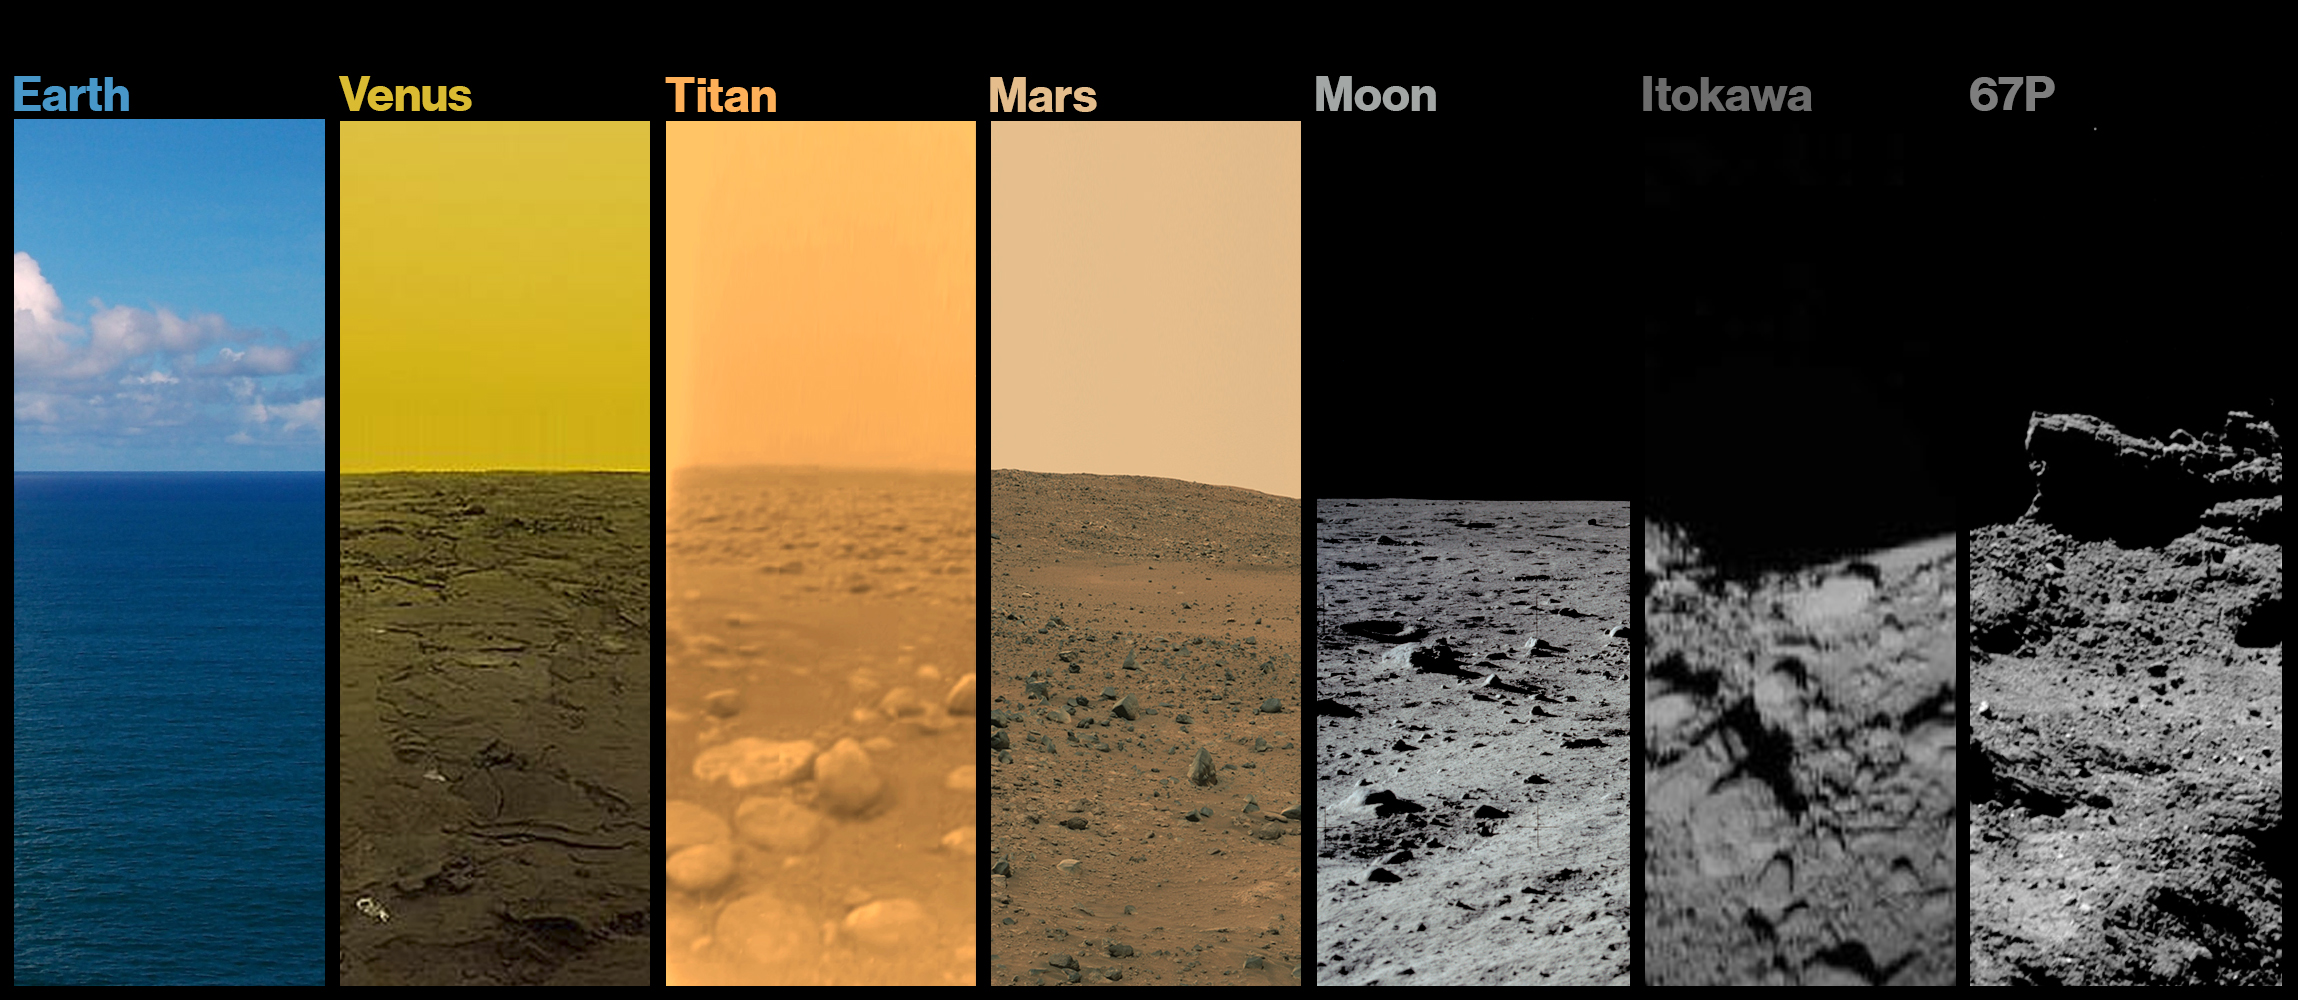 A picture of every extraterrestrial body that robots have landed on and photographed and earth.